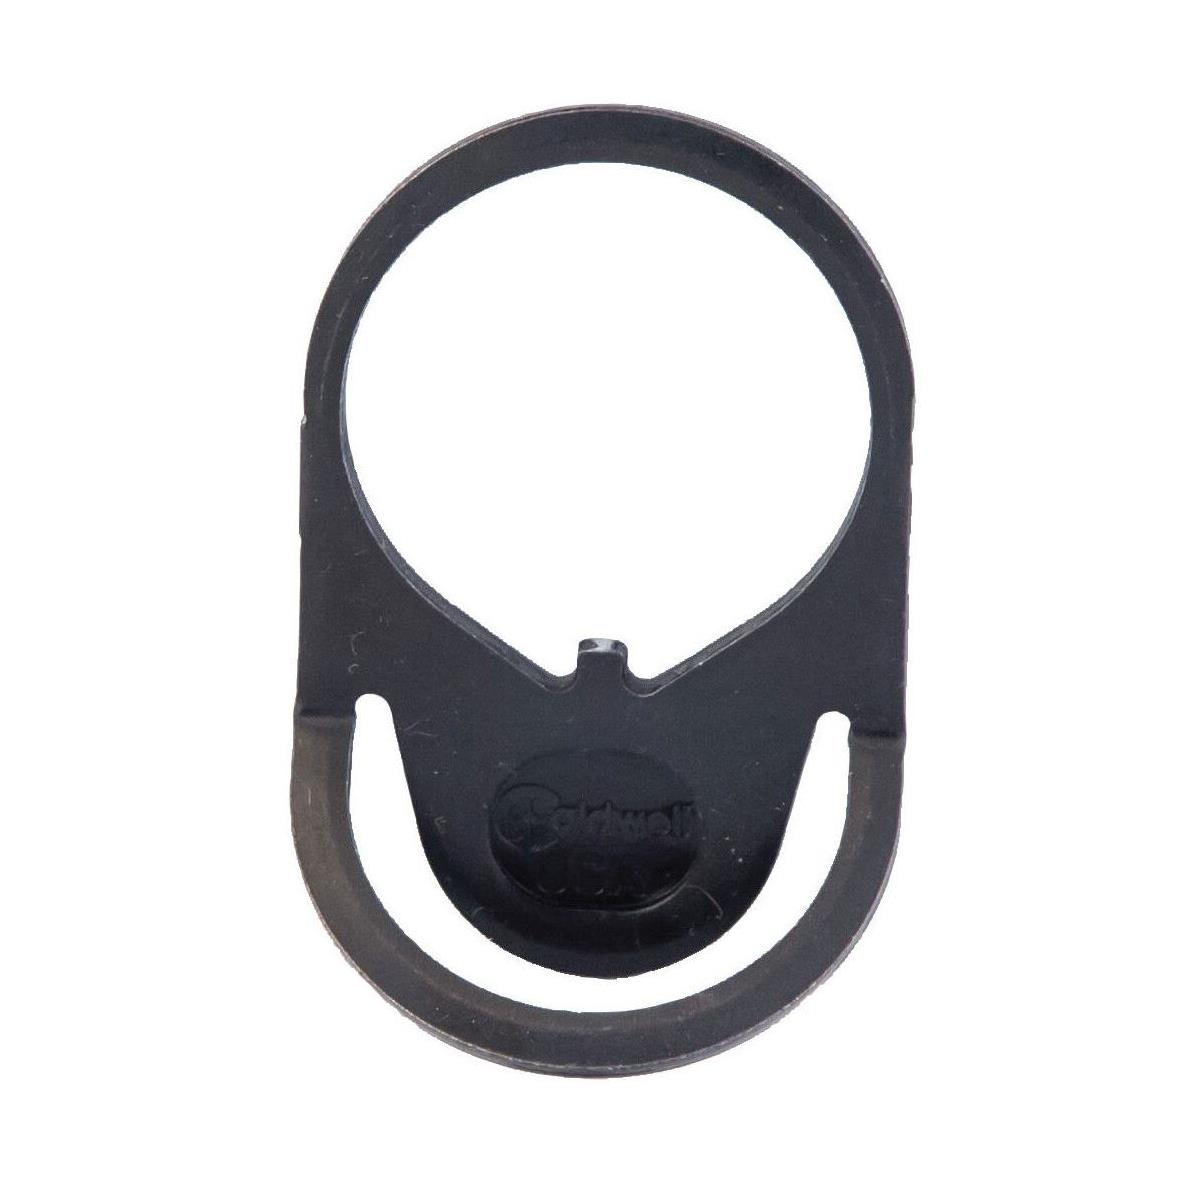 Image of Caldwell AR Receiver End Plate Sling Mount